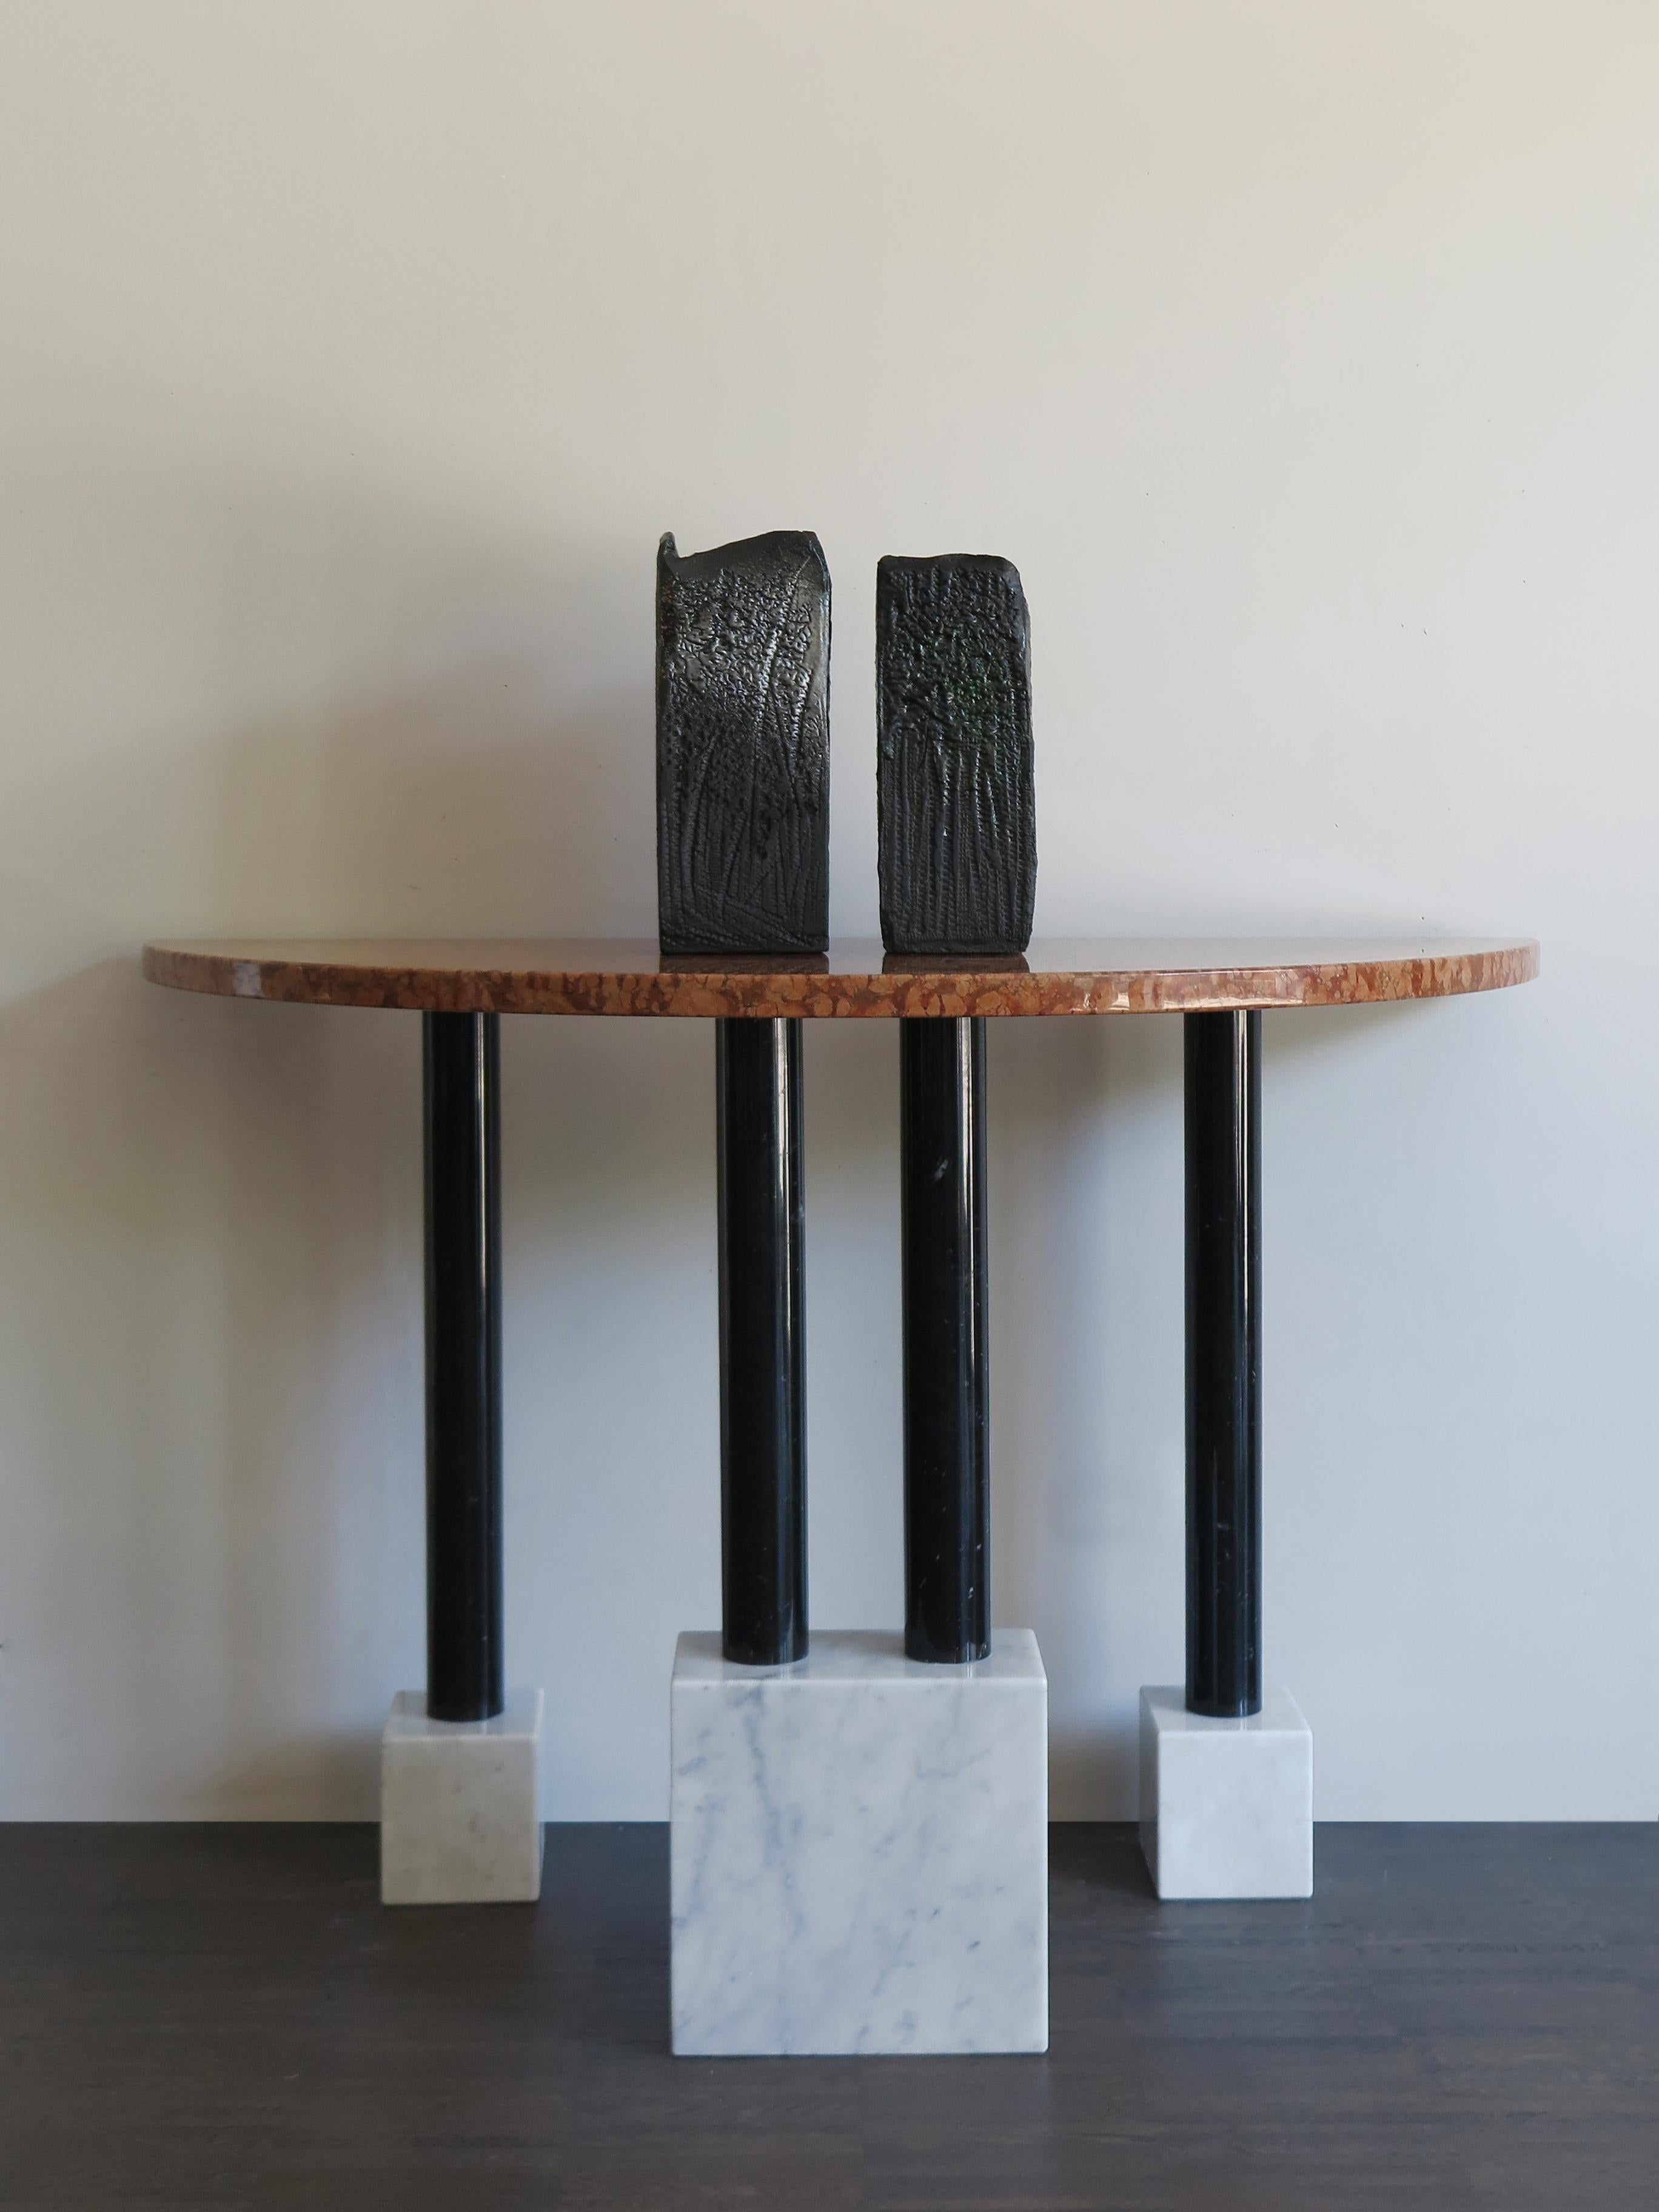 Italian very rare marble console table designed by famous italian artist Ettore Sottsass and produced by Ultima Edizione in limited edition, made up of white Carrara marble blocks, black Marquinia marble columns and red Verona marble top, 1980